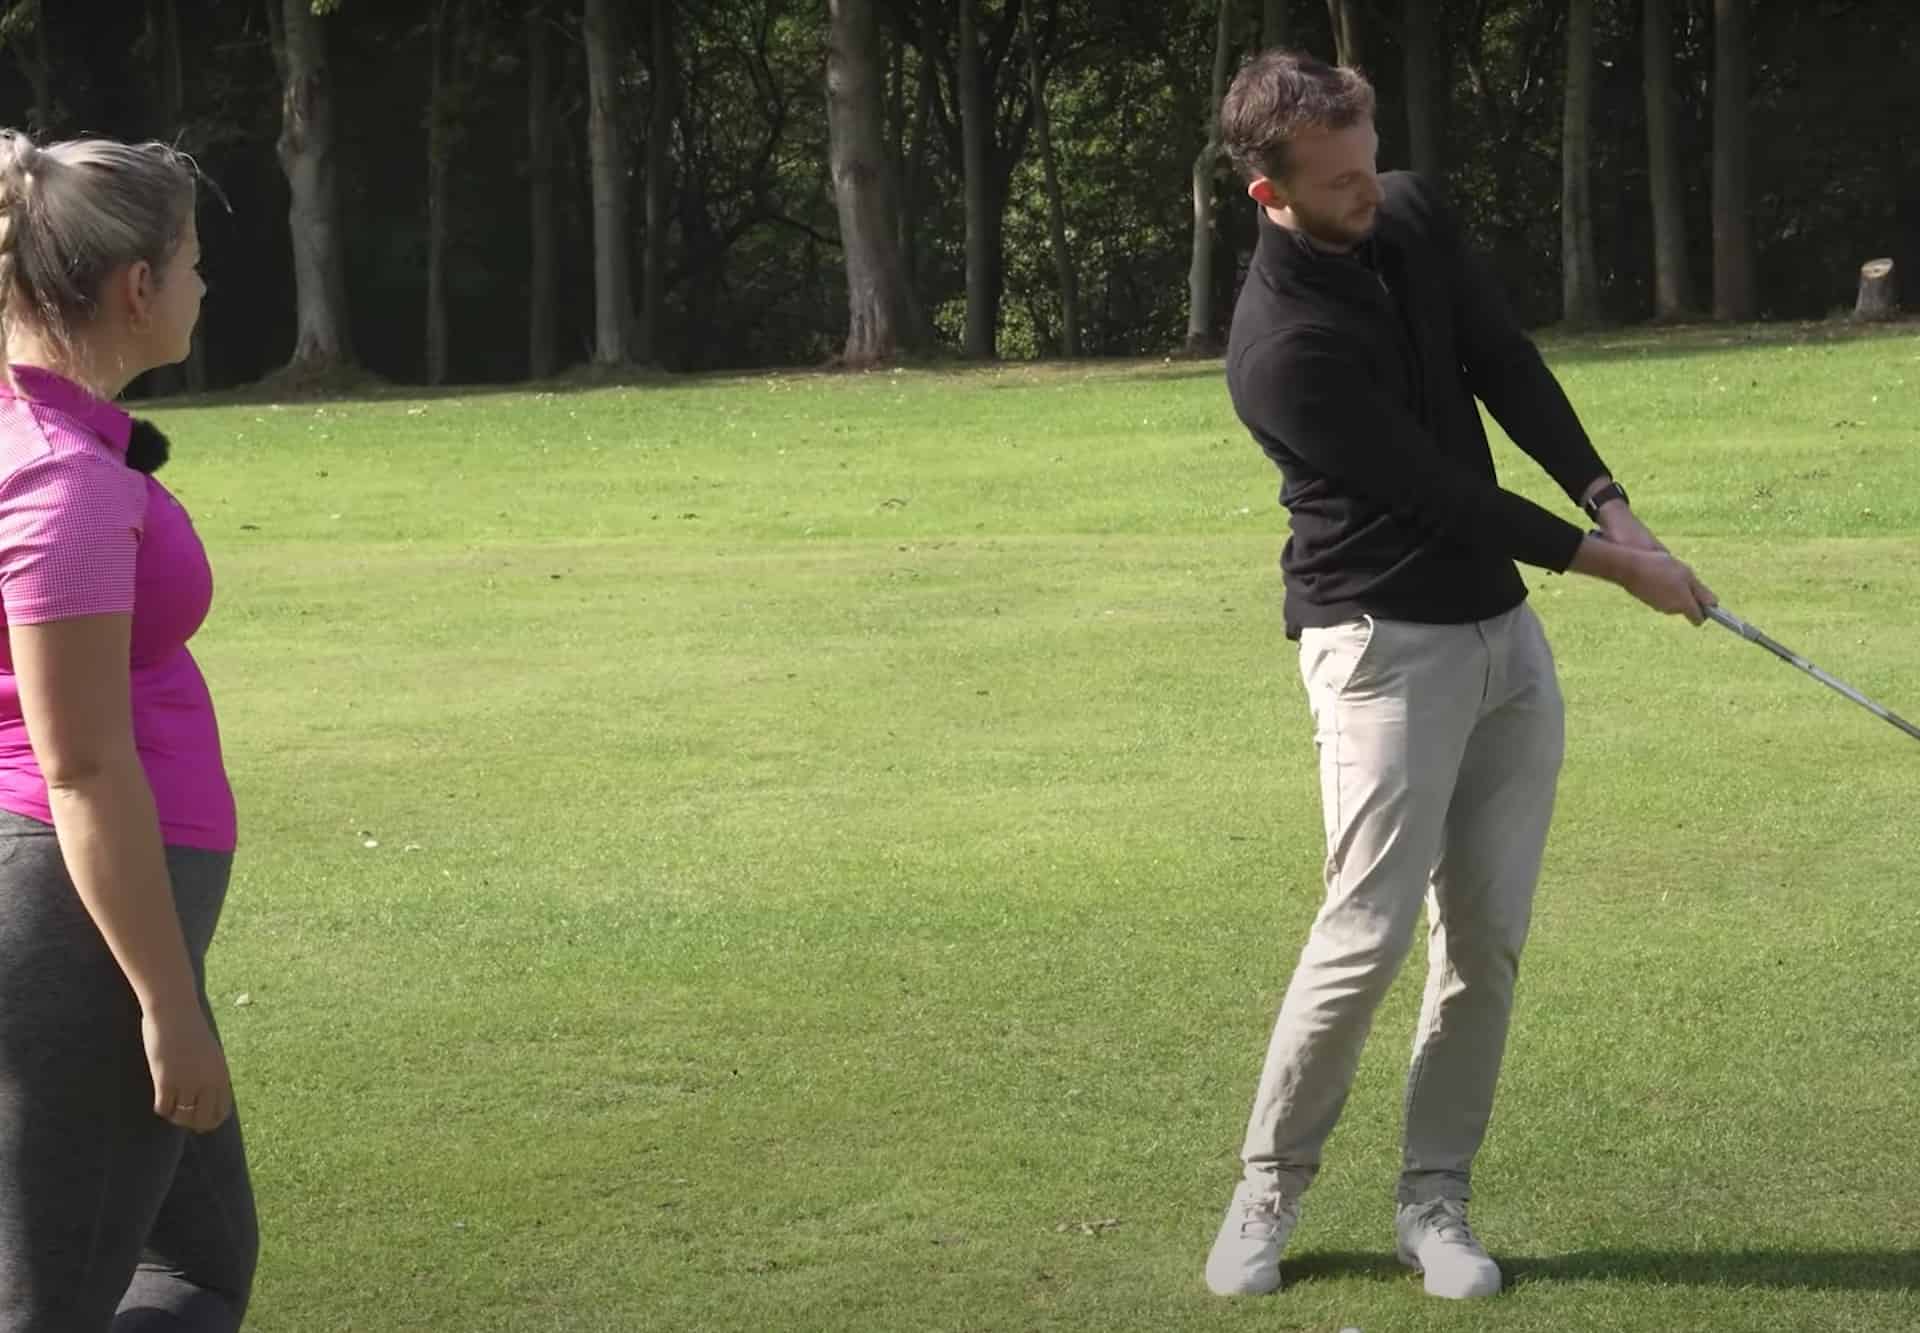 How To Use The Bounce To Improve Your Chipping - done